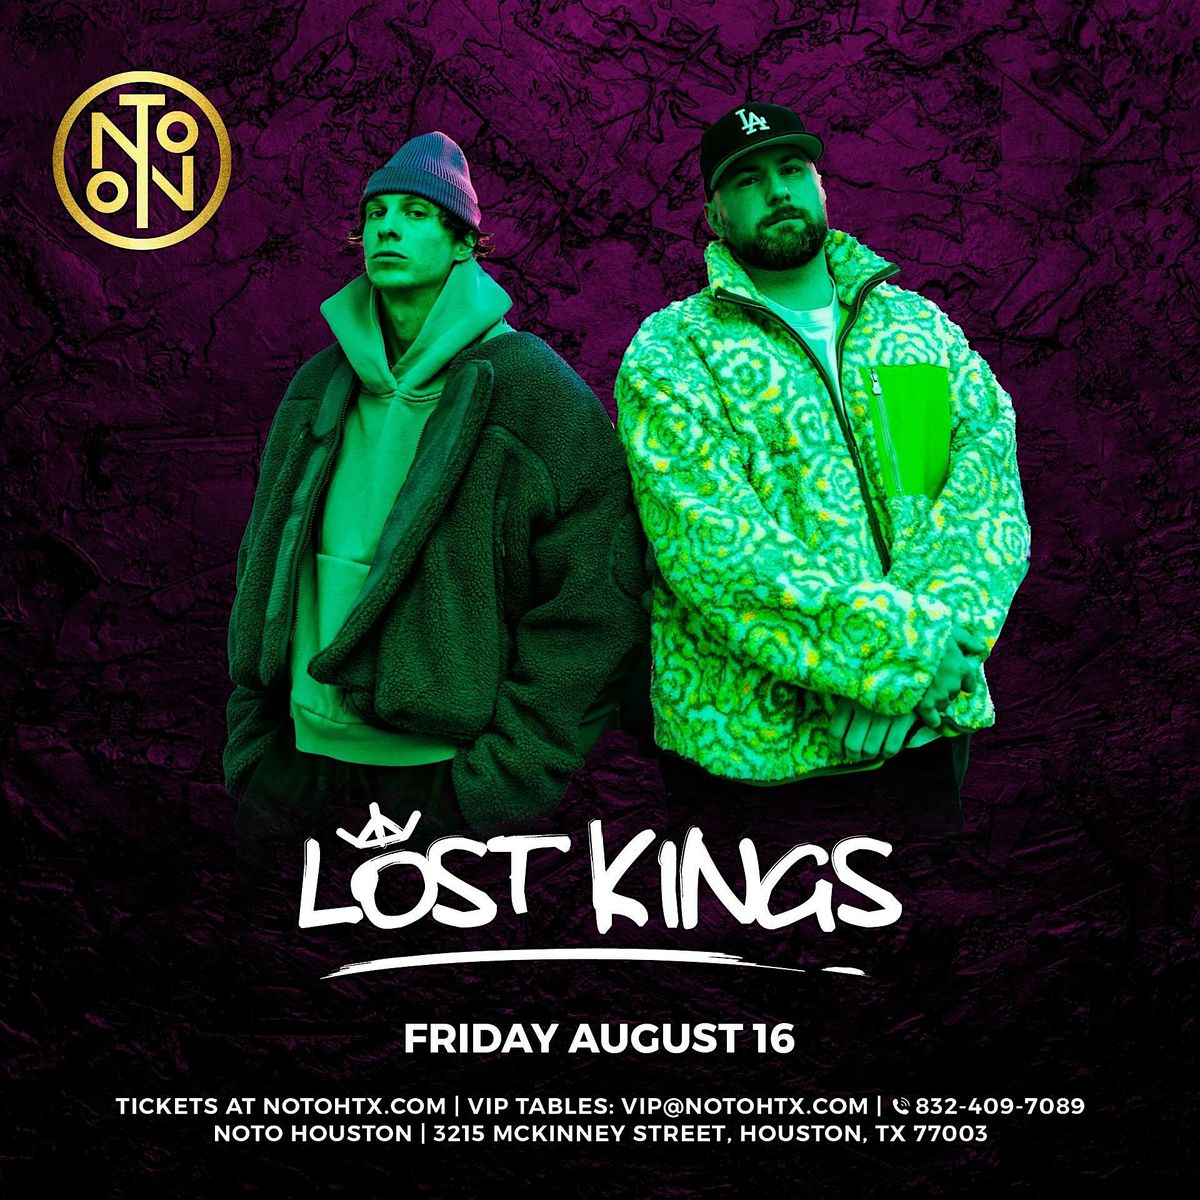 Lost Kings @ Noto Houston August 16 18+ Event